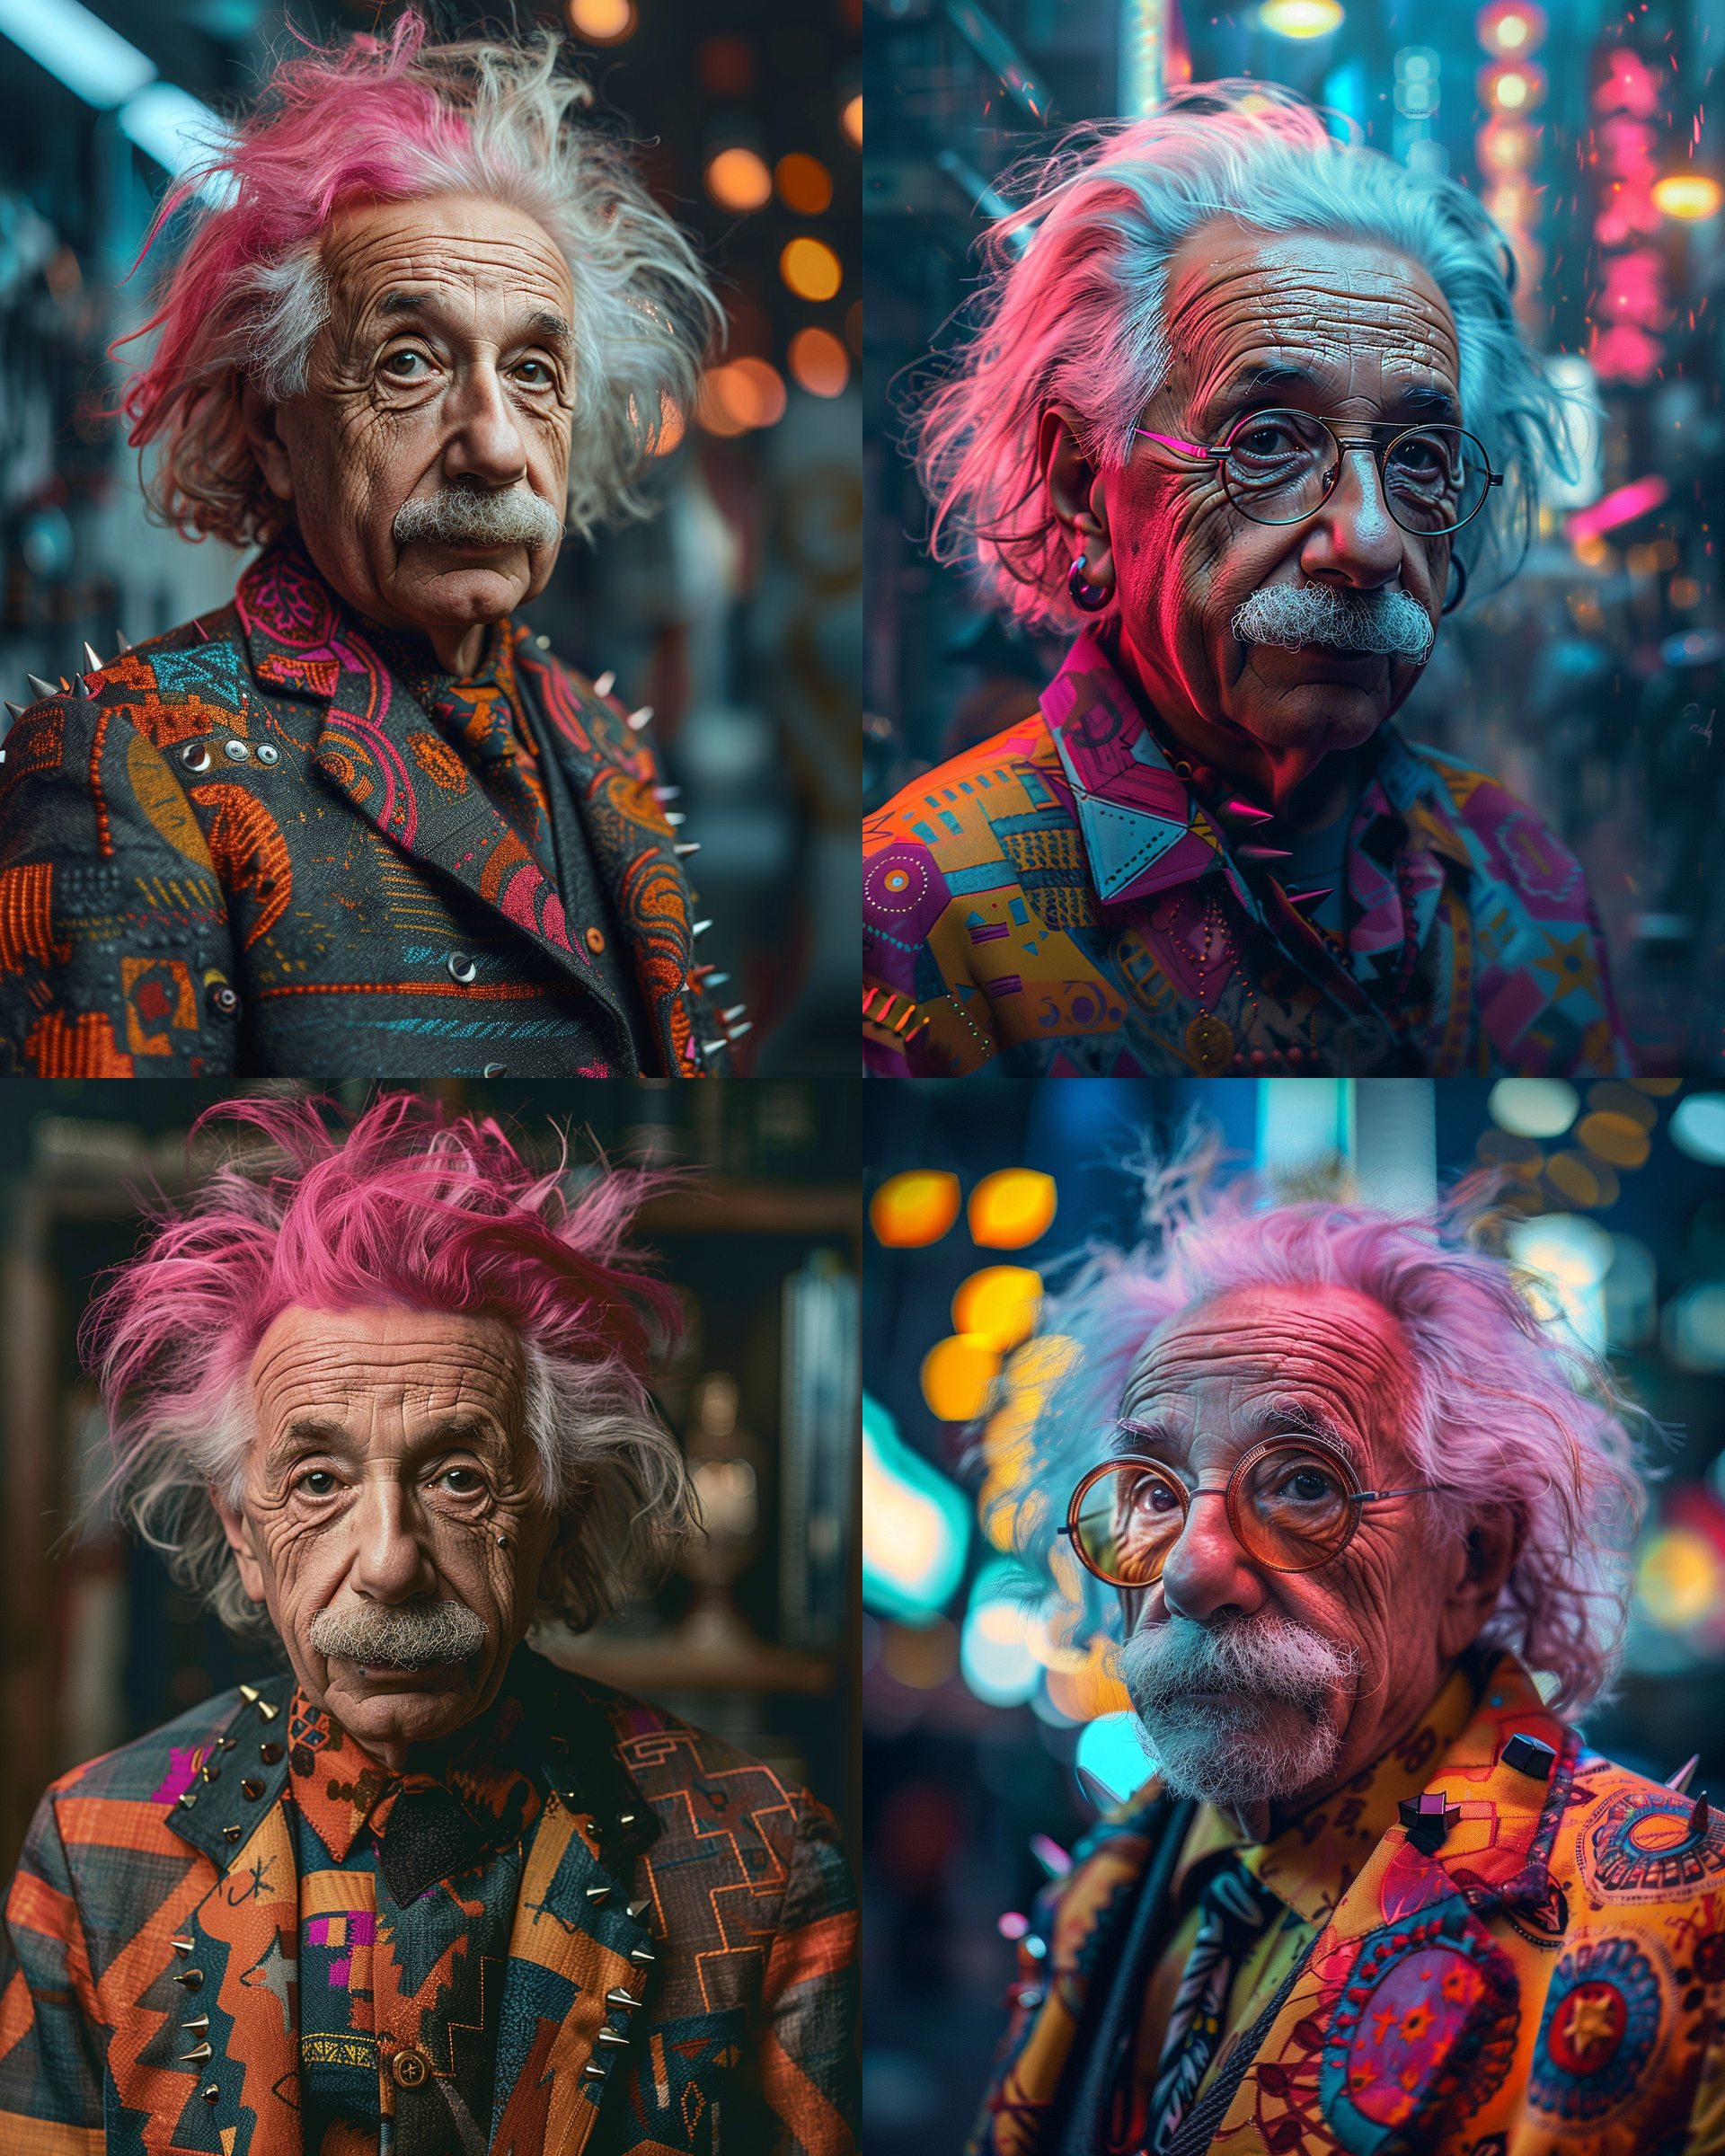 Collage of four lively portraits of Albert Einstein in vivid outfits and varying hair colors, set against expressive urban sc